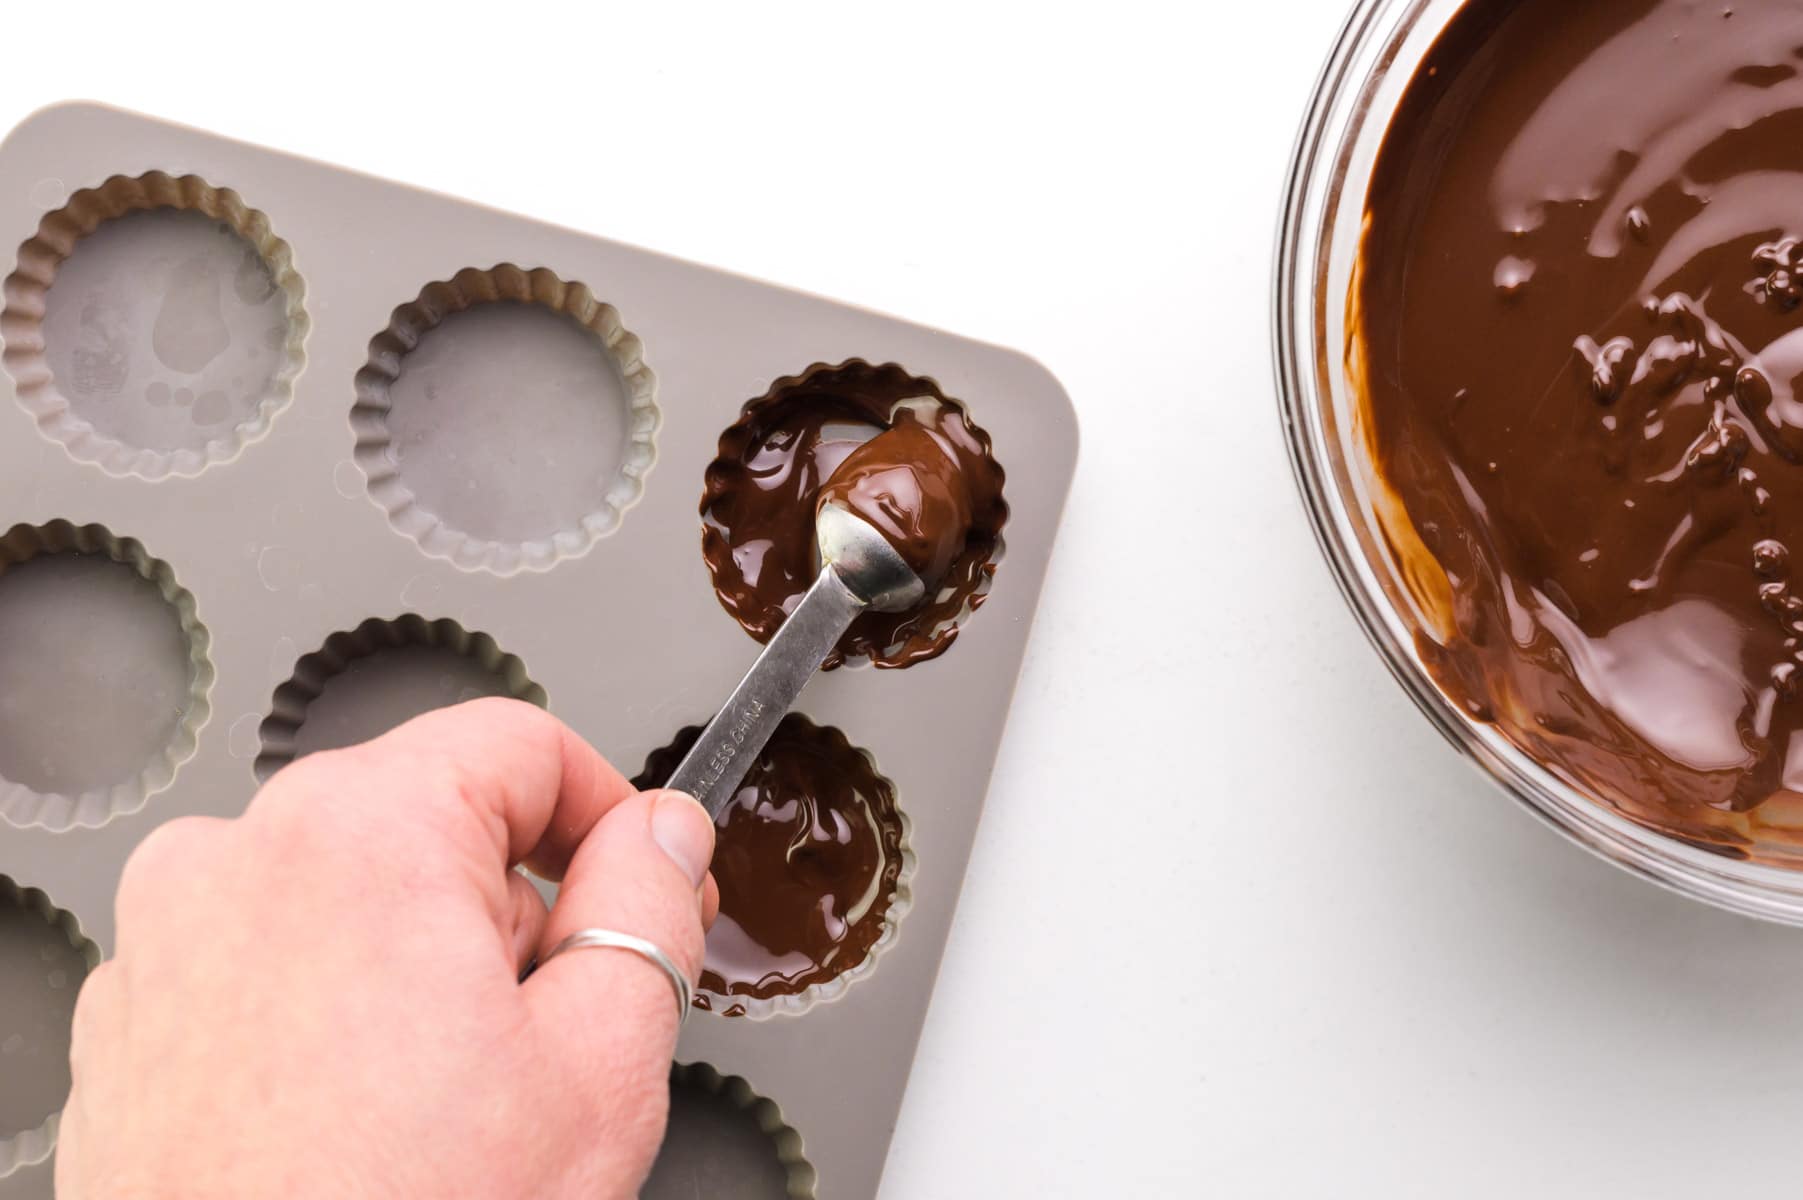 A hand holds a spoon spreading melted chocolate in a candy mold.